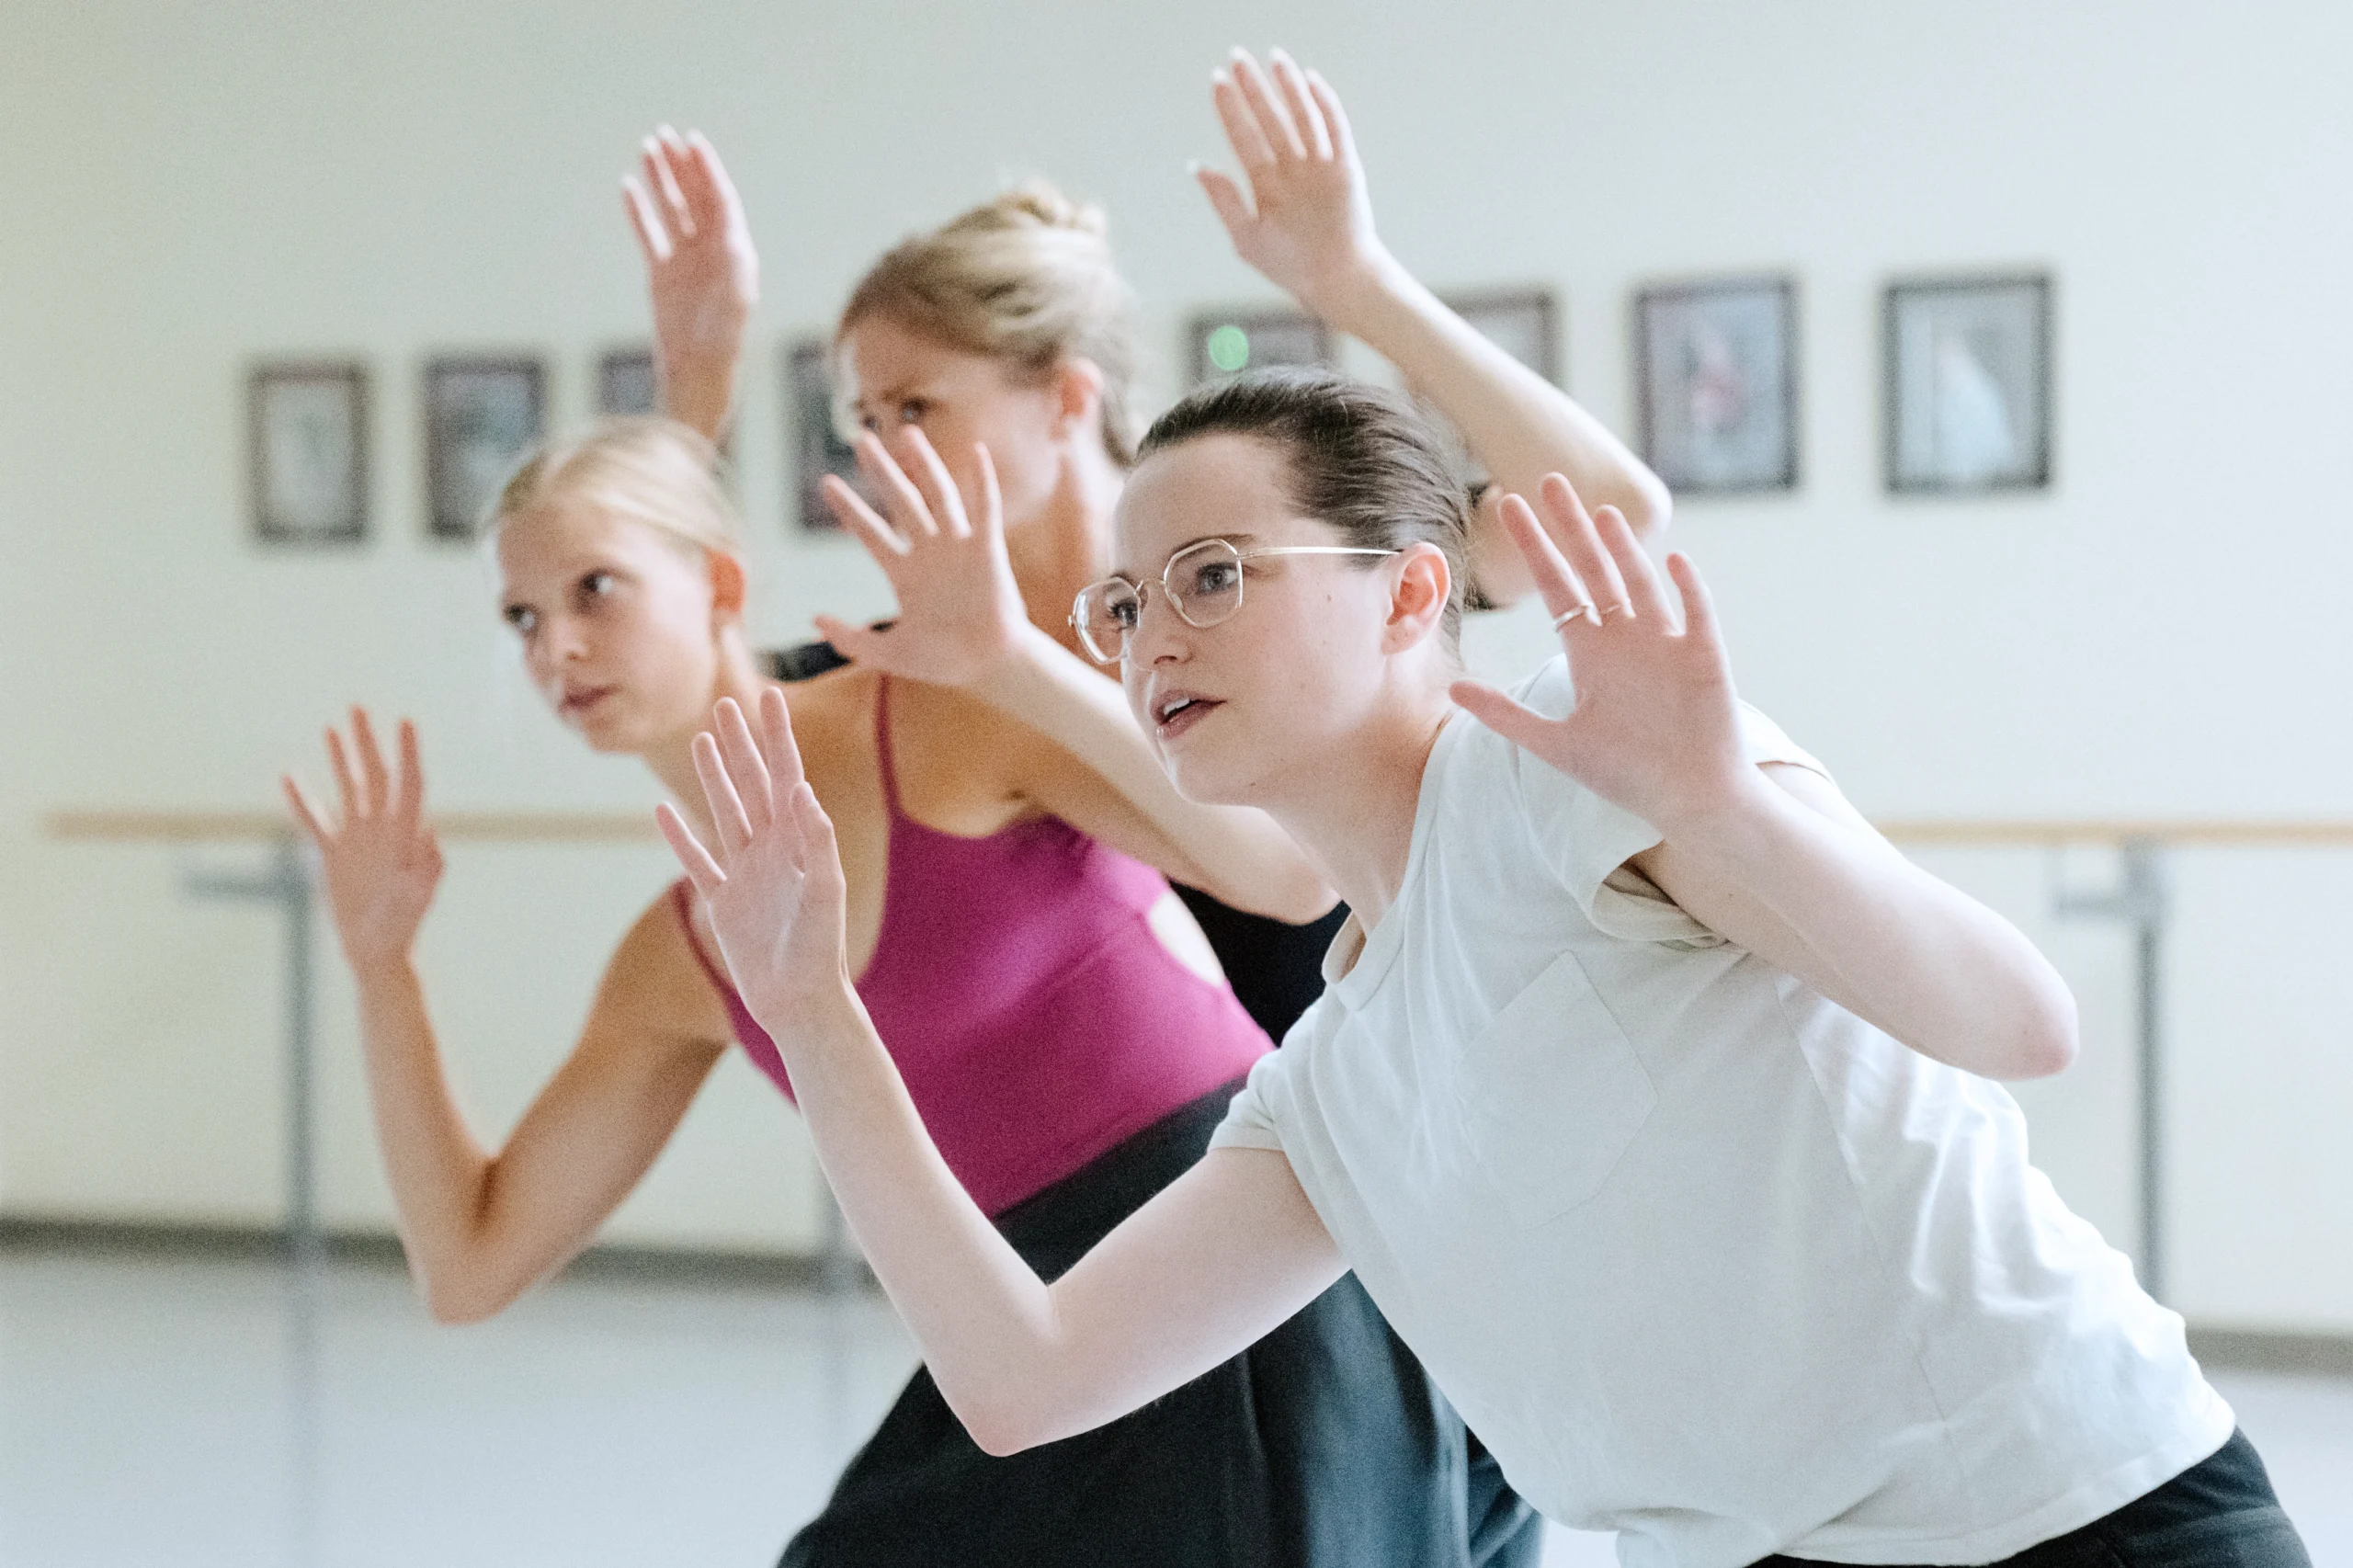 Emma Portner, in a white t-shirt and glasses, is shown from the waist-up. She leans to one side, hands raised as though pressing them against glass. Two dancers just behind her imitate the pose as they stand back-to-front, very close together.